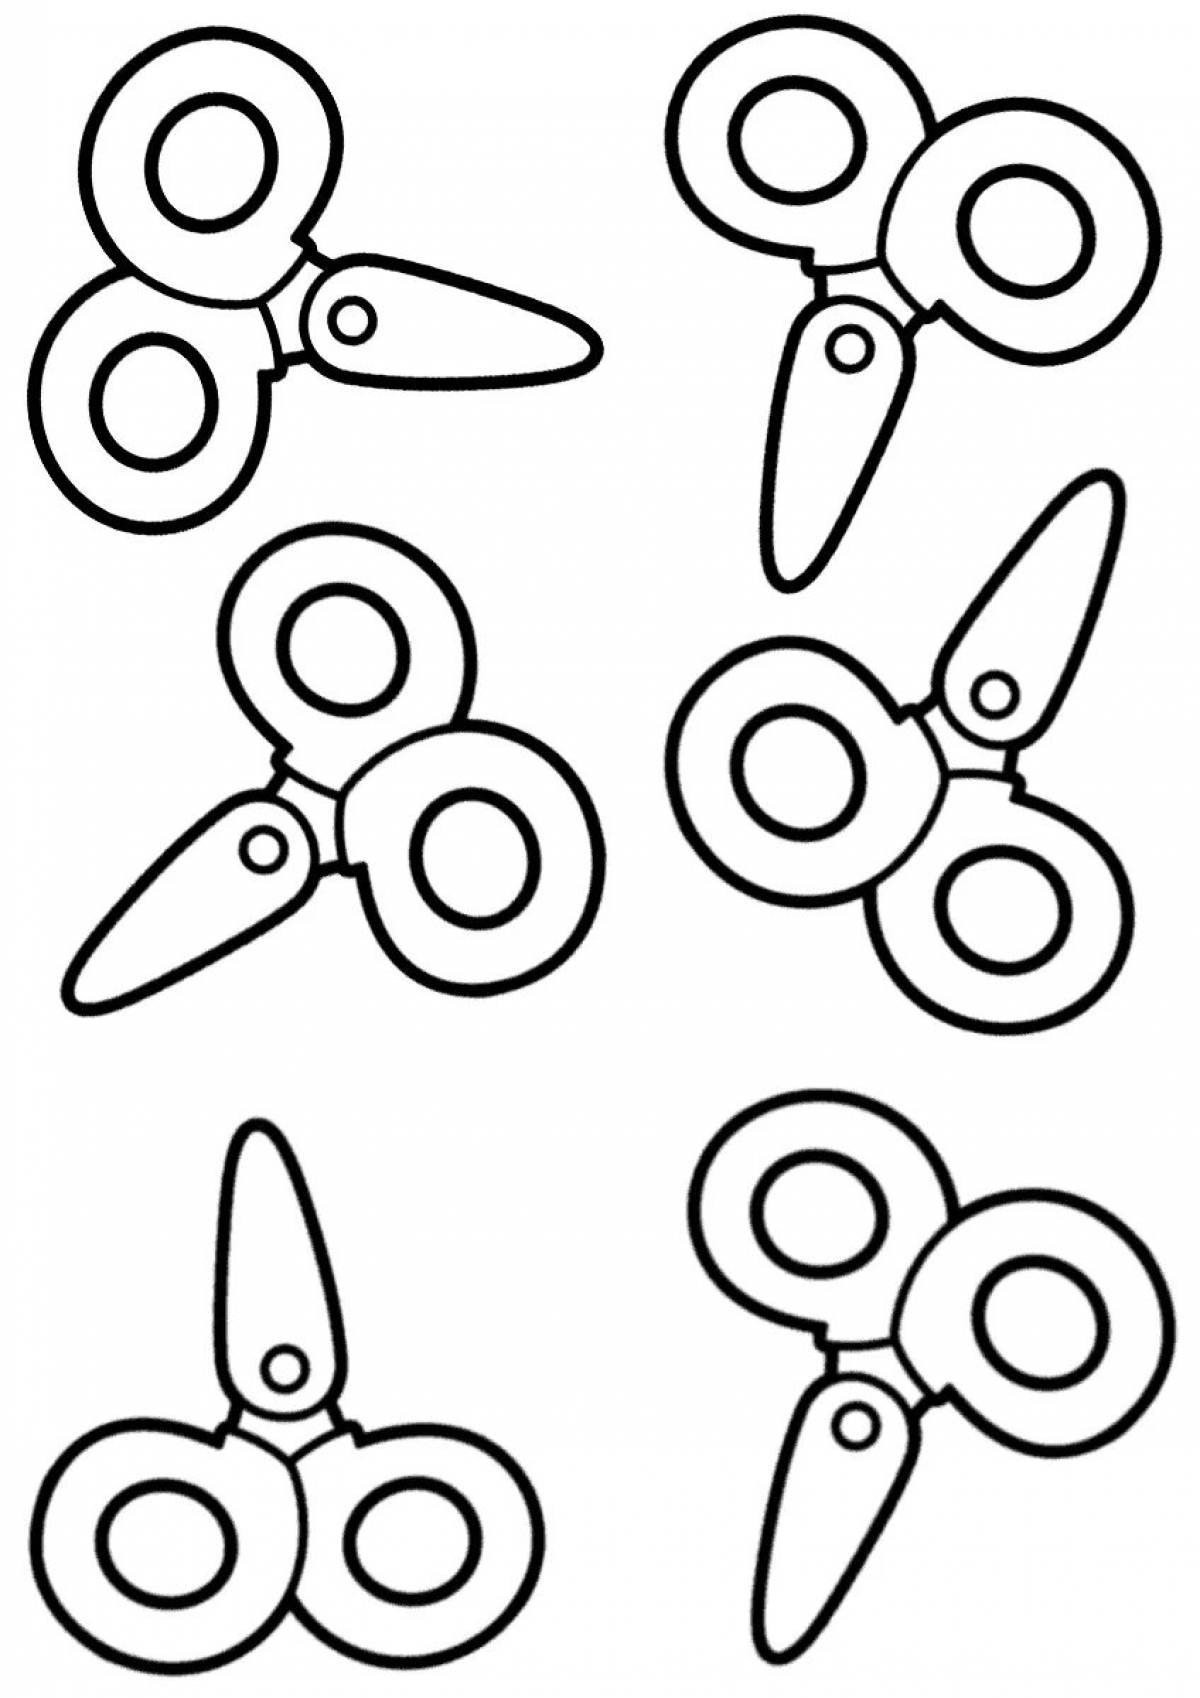 Live scissors coloring for kids